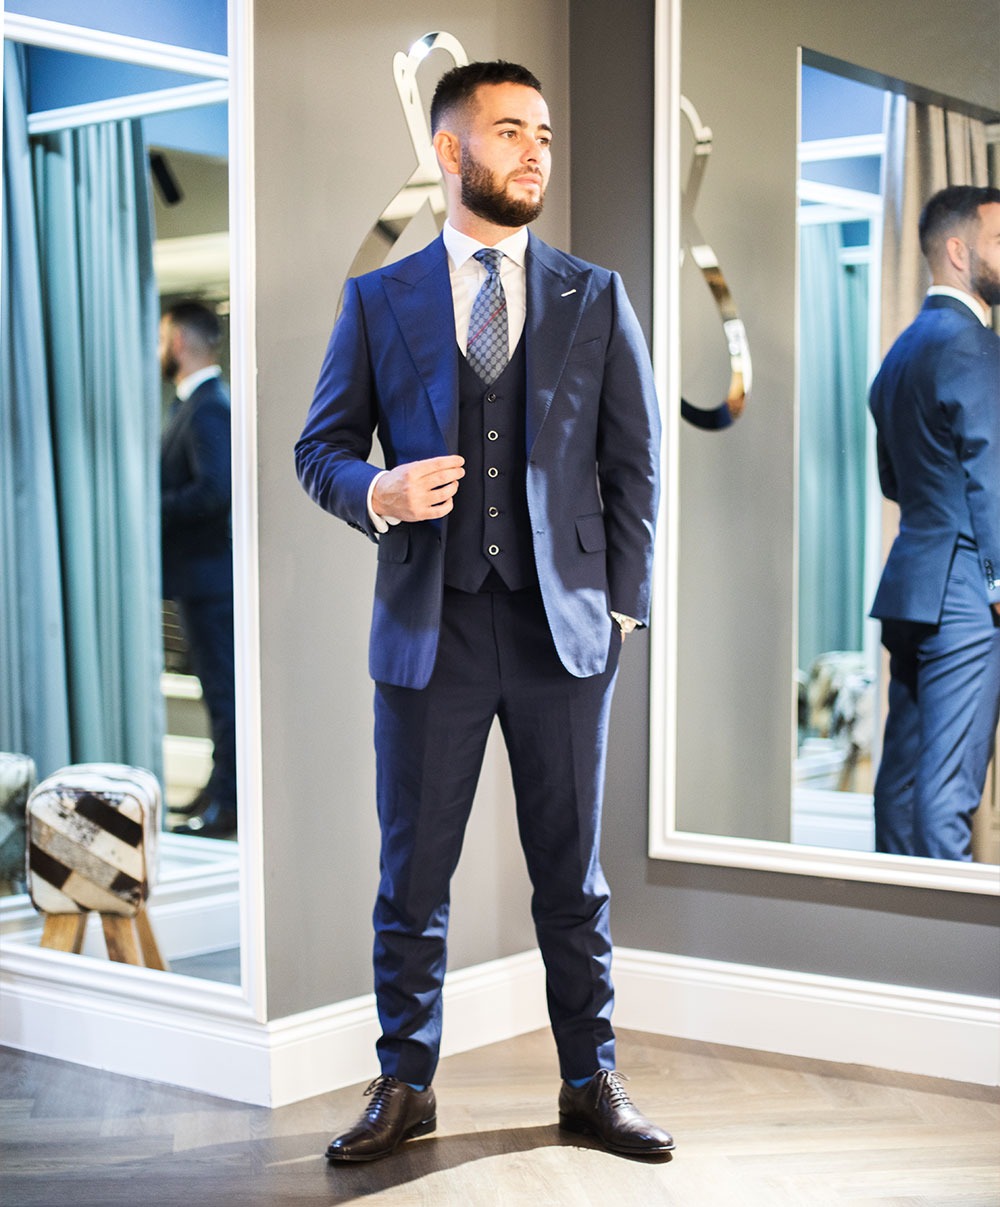 The Appeal Of Custom Suits And Their Global Popularity